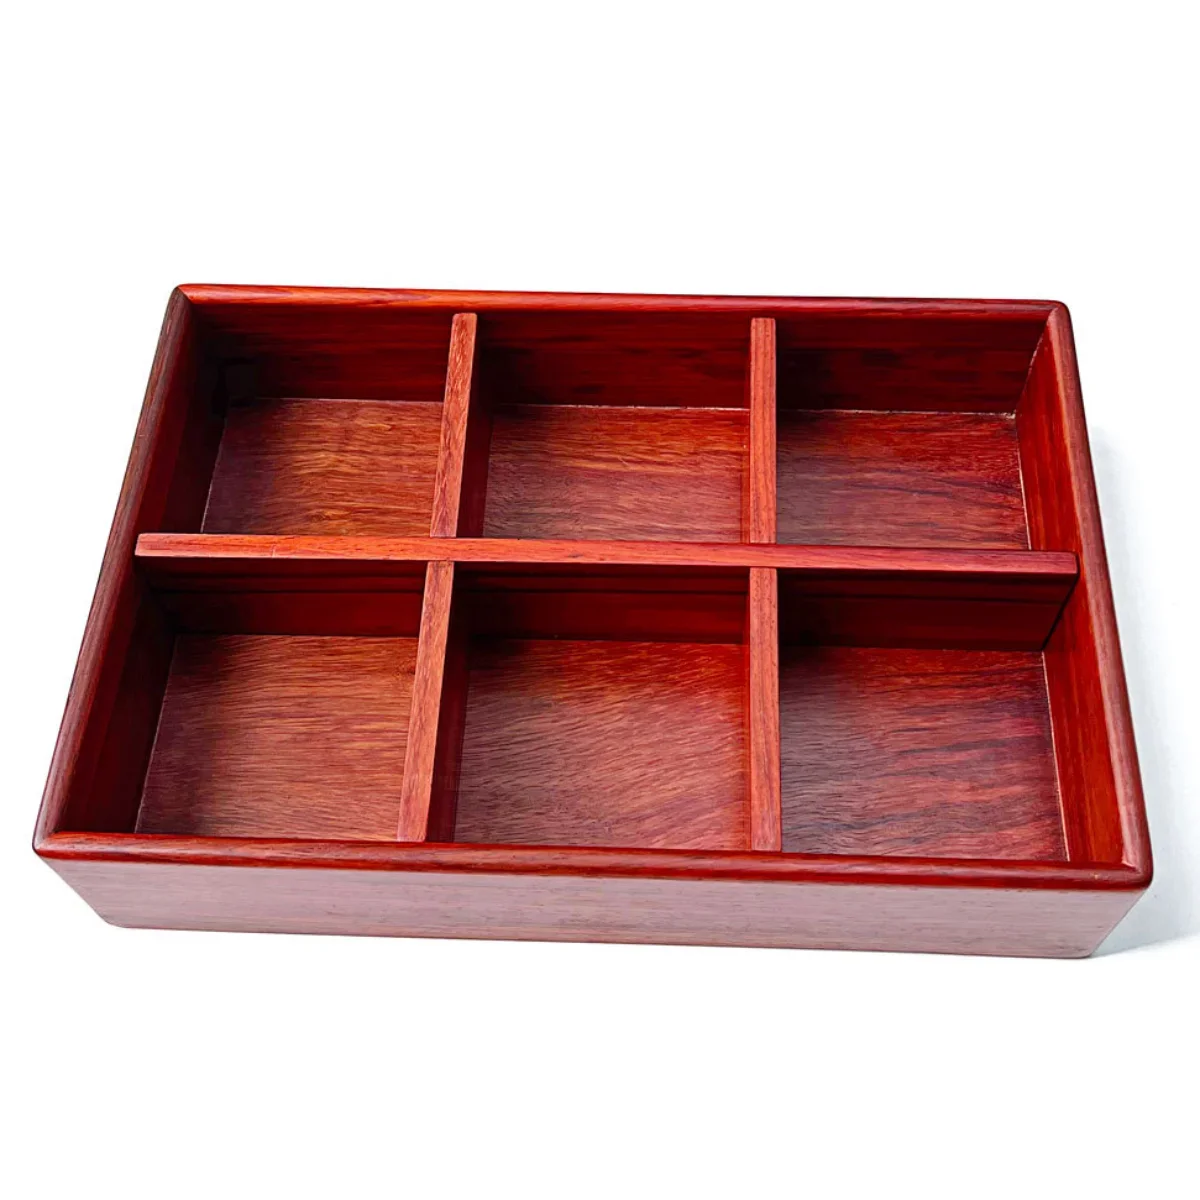 

Mahogany Solid Wood Fruit Box New Chinese Living Room Household Compartment Nut Tray Dried Fruit Snacks Jewelry Storage Box